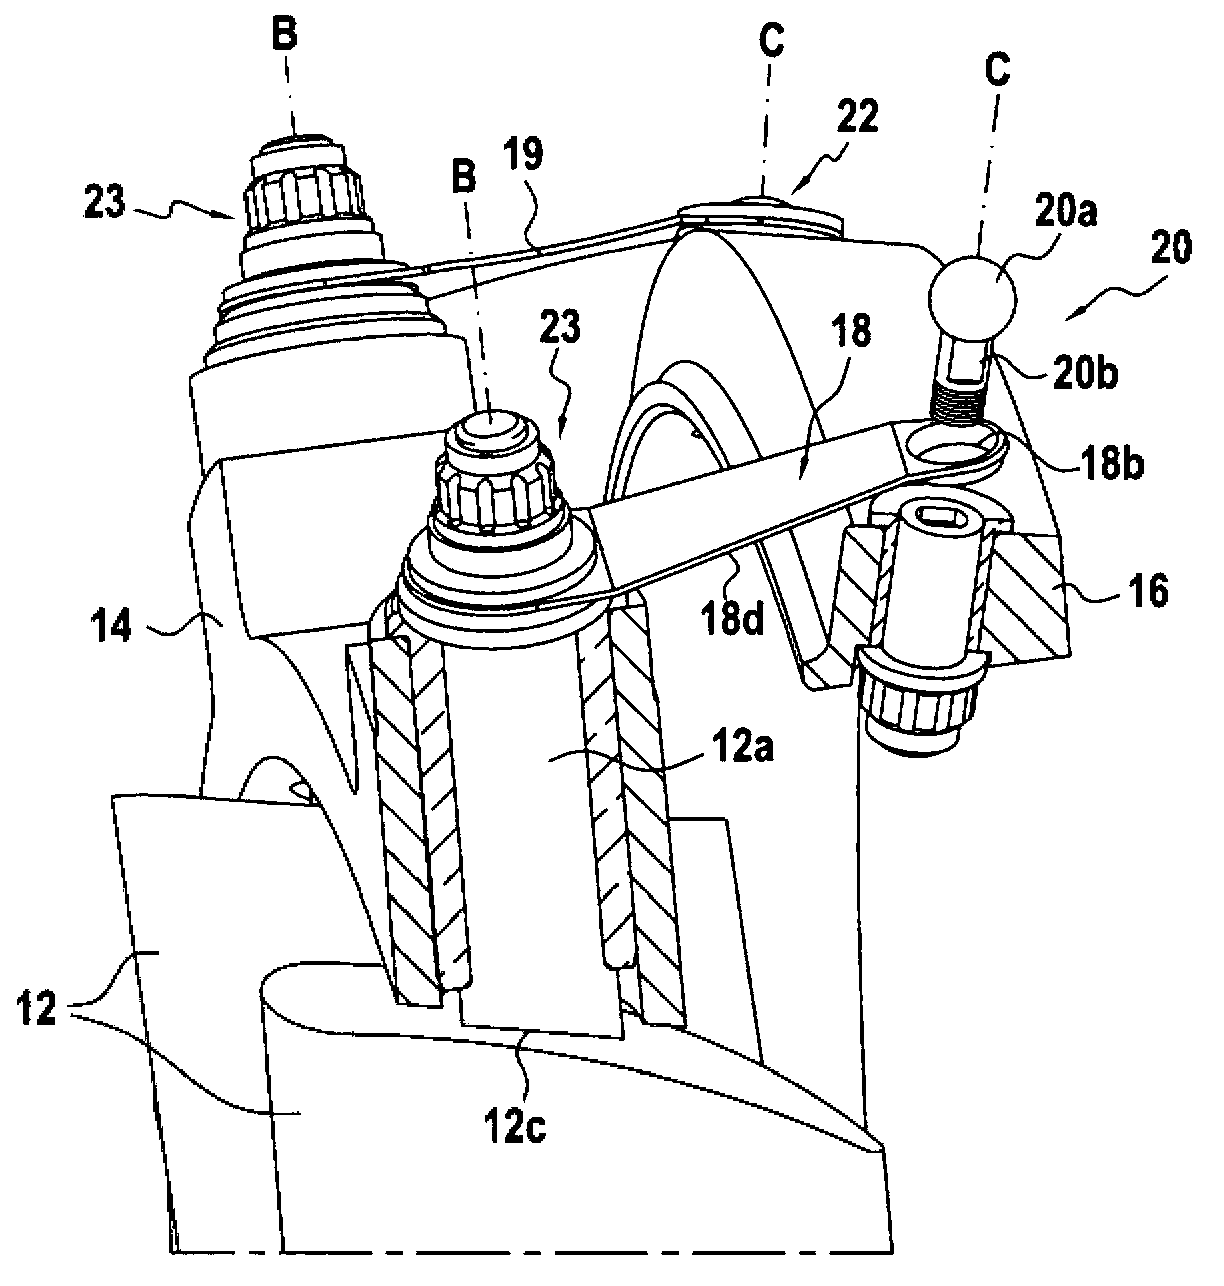 Device for controlling pivoting blades of a turbine engine